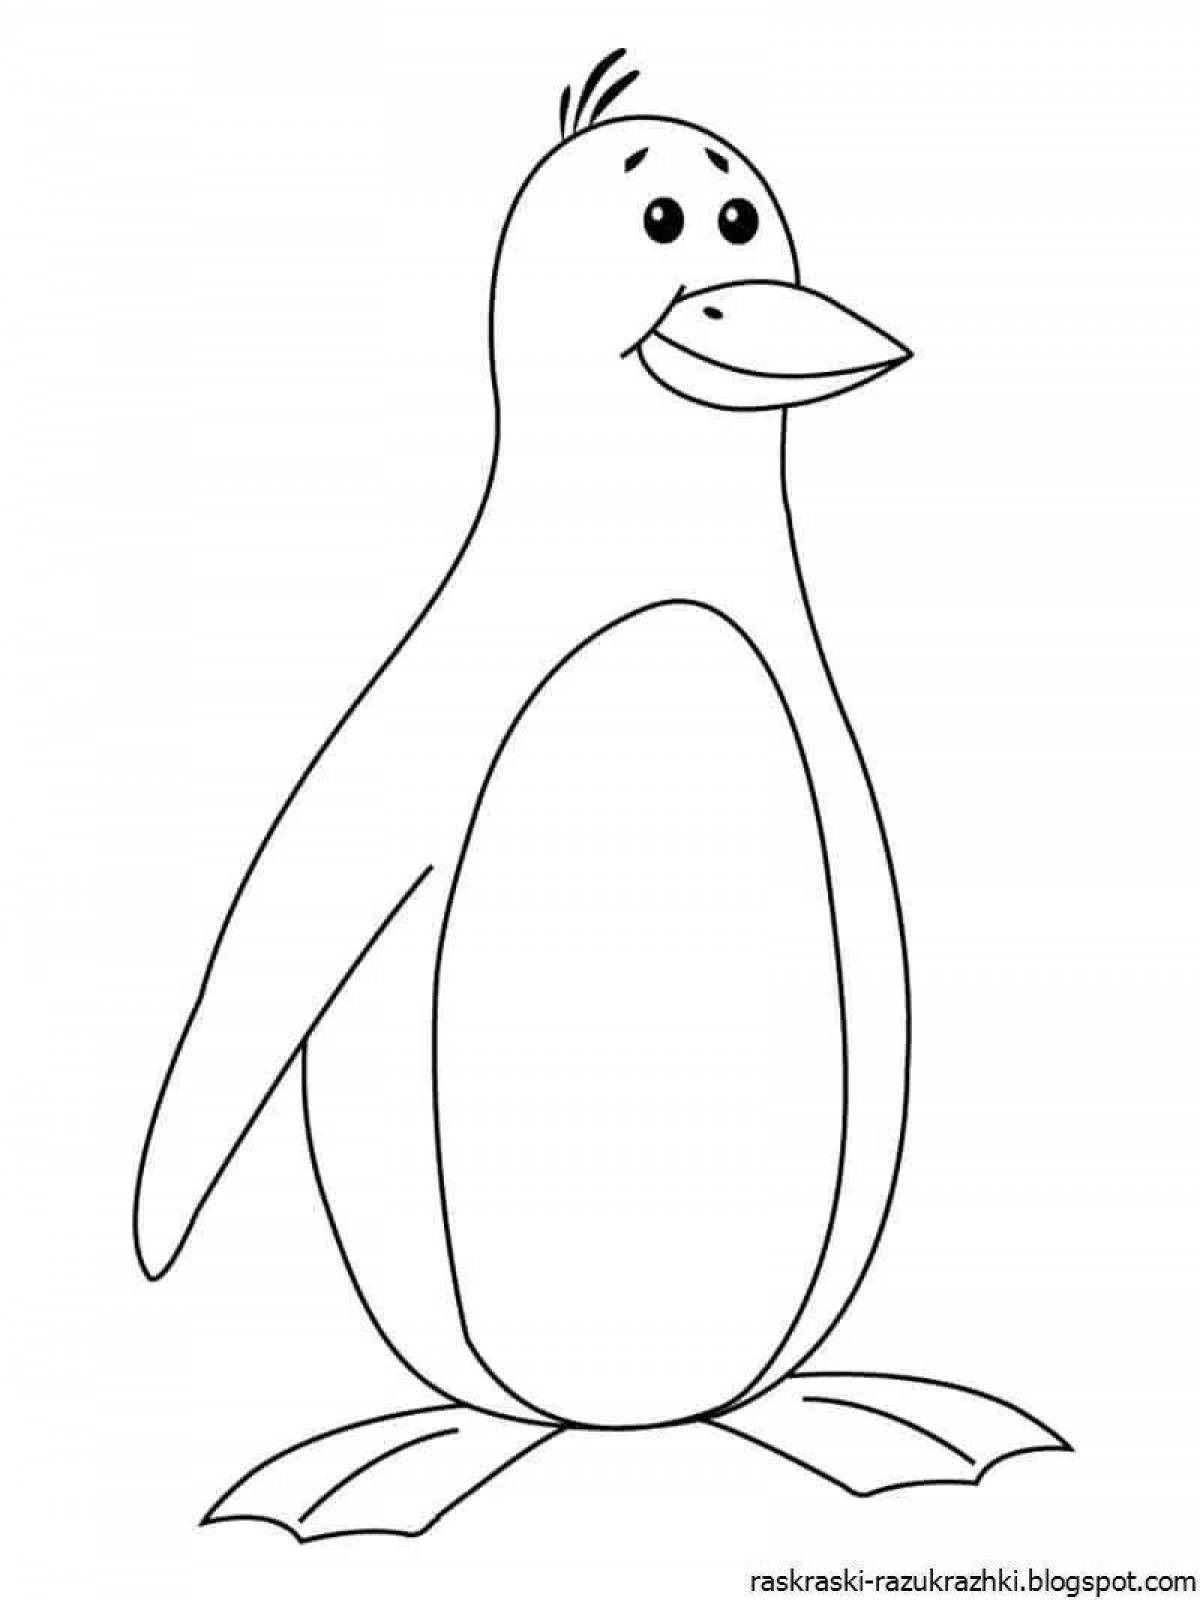 Live penguin coloring page